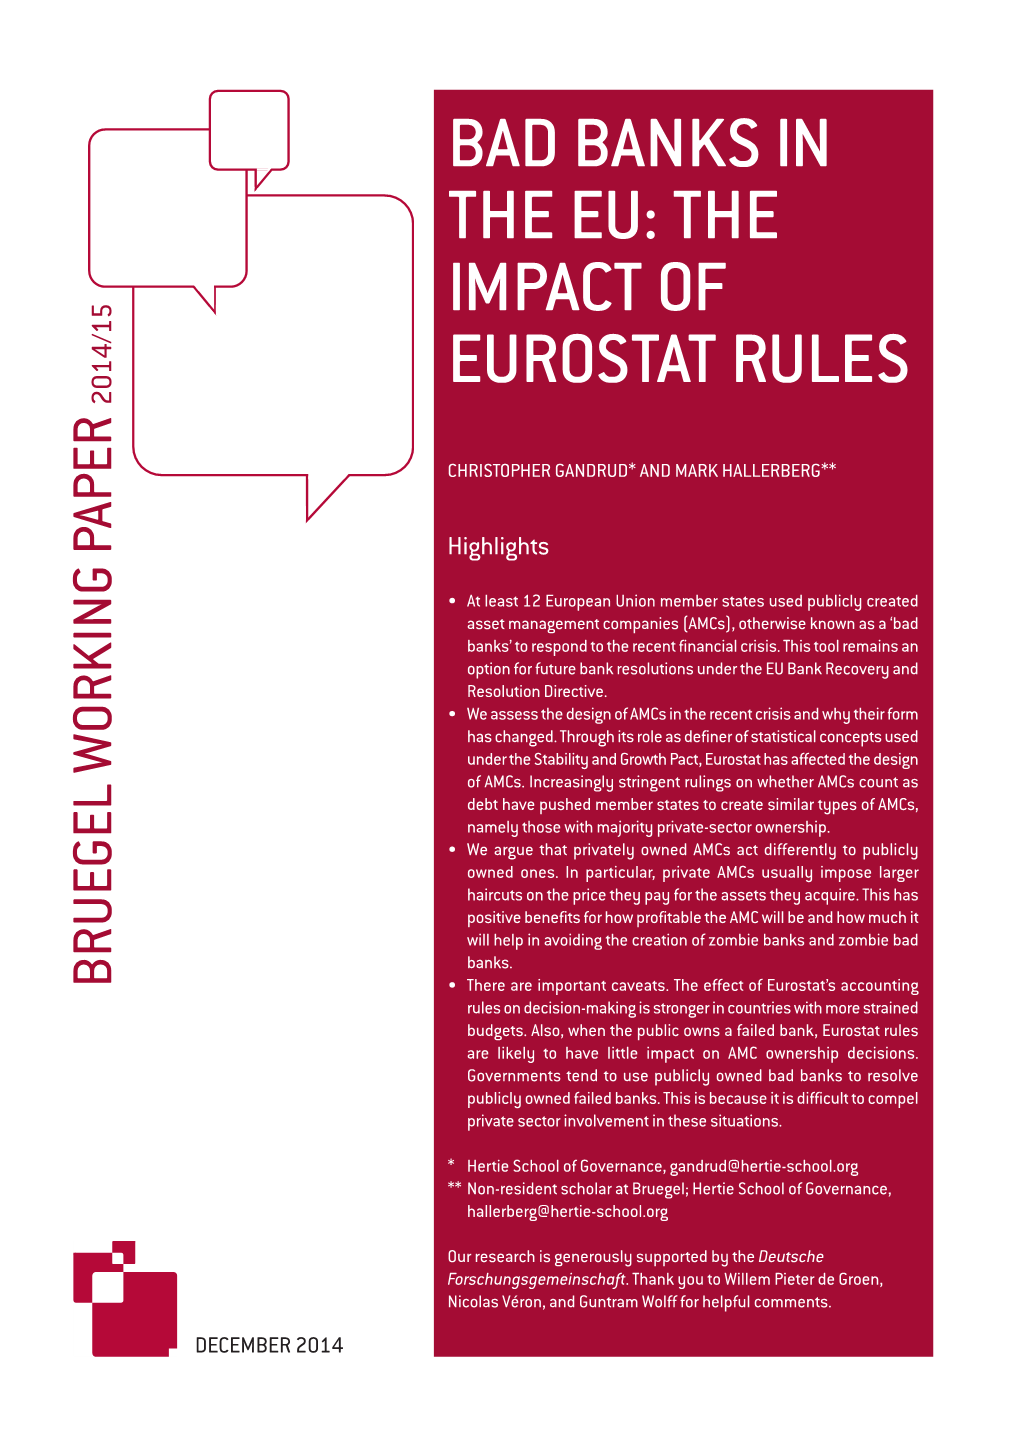 Bad Banks in the Eu: the Impact of Eurostat Rules 2014/15